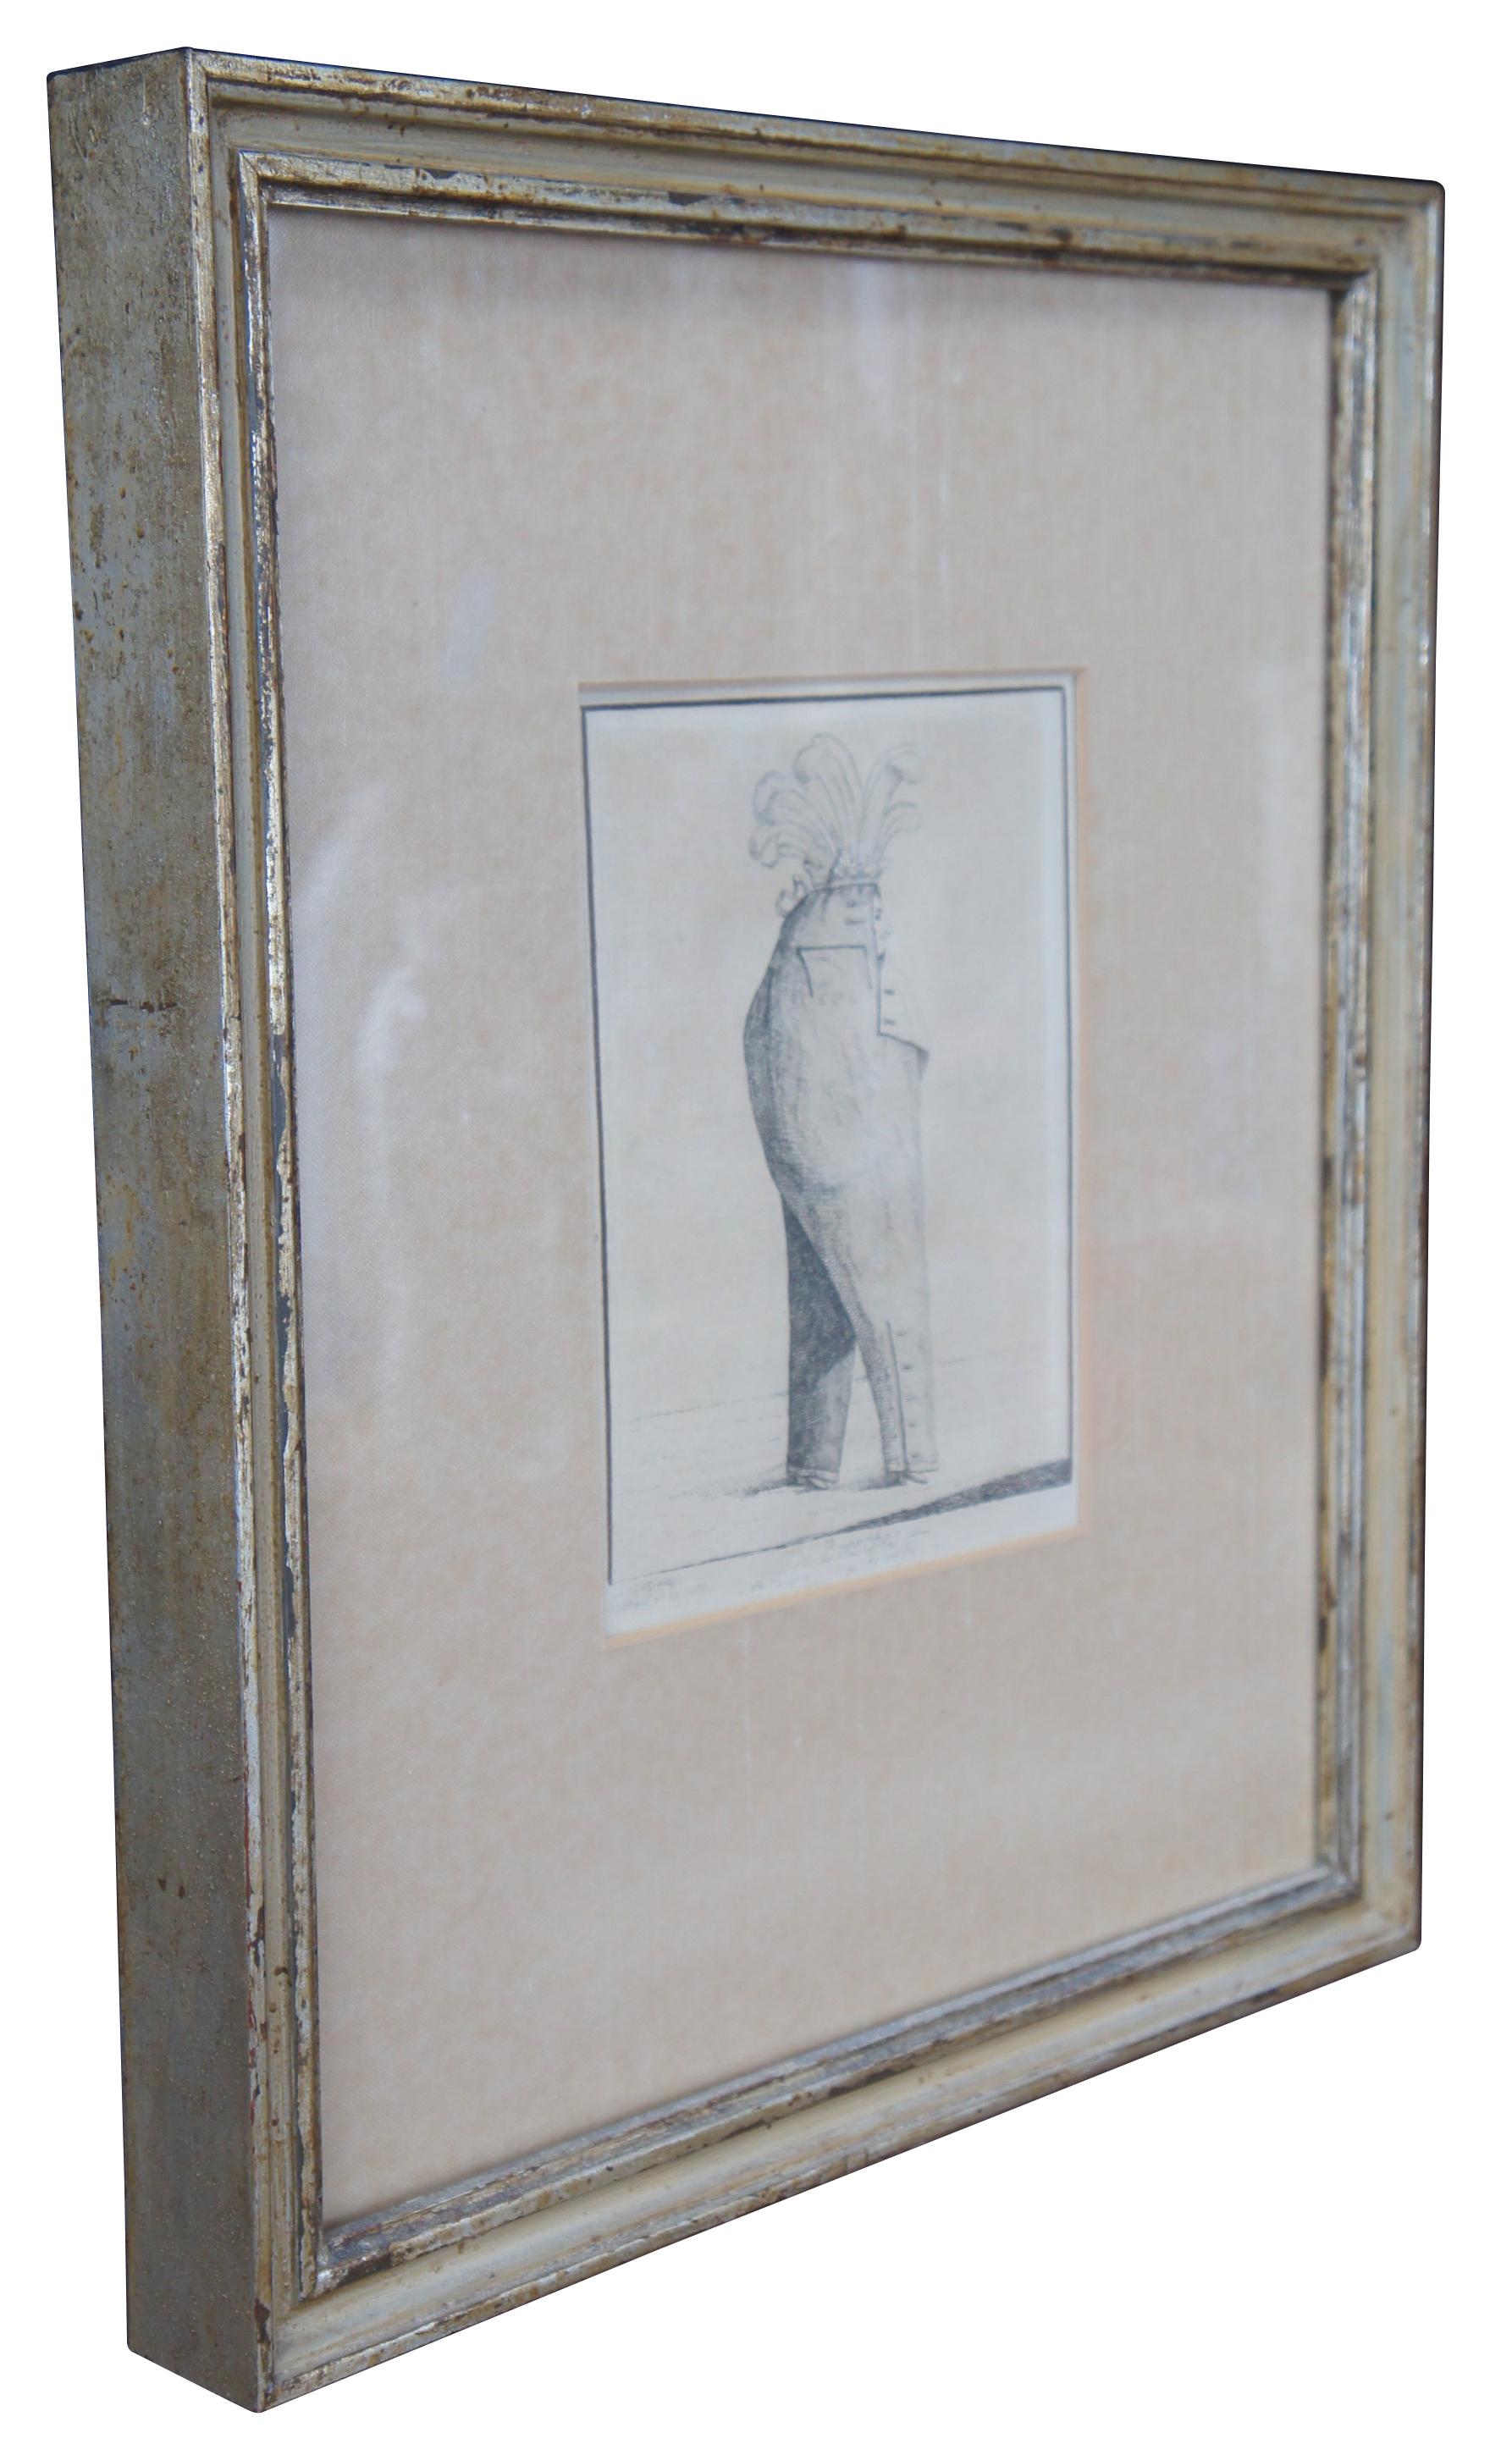 Antique 18th century engraving aptly titled, The Breeches. It features a large pair of paints worn by a much smaller figure, who smirks as they walk along. Circa 1775.

Measures: 12